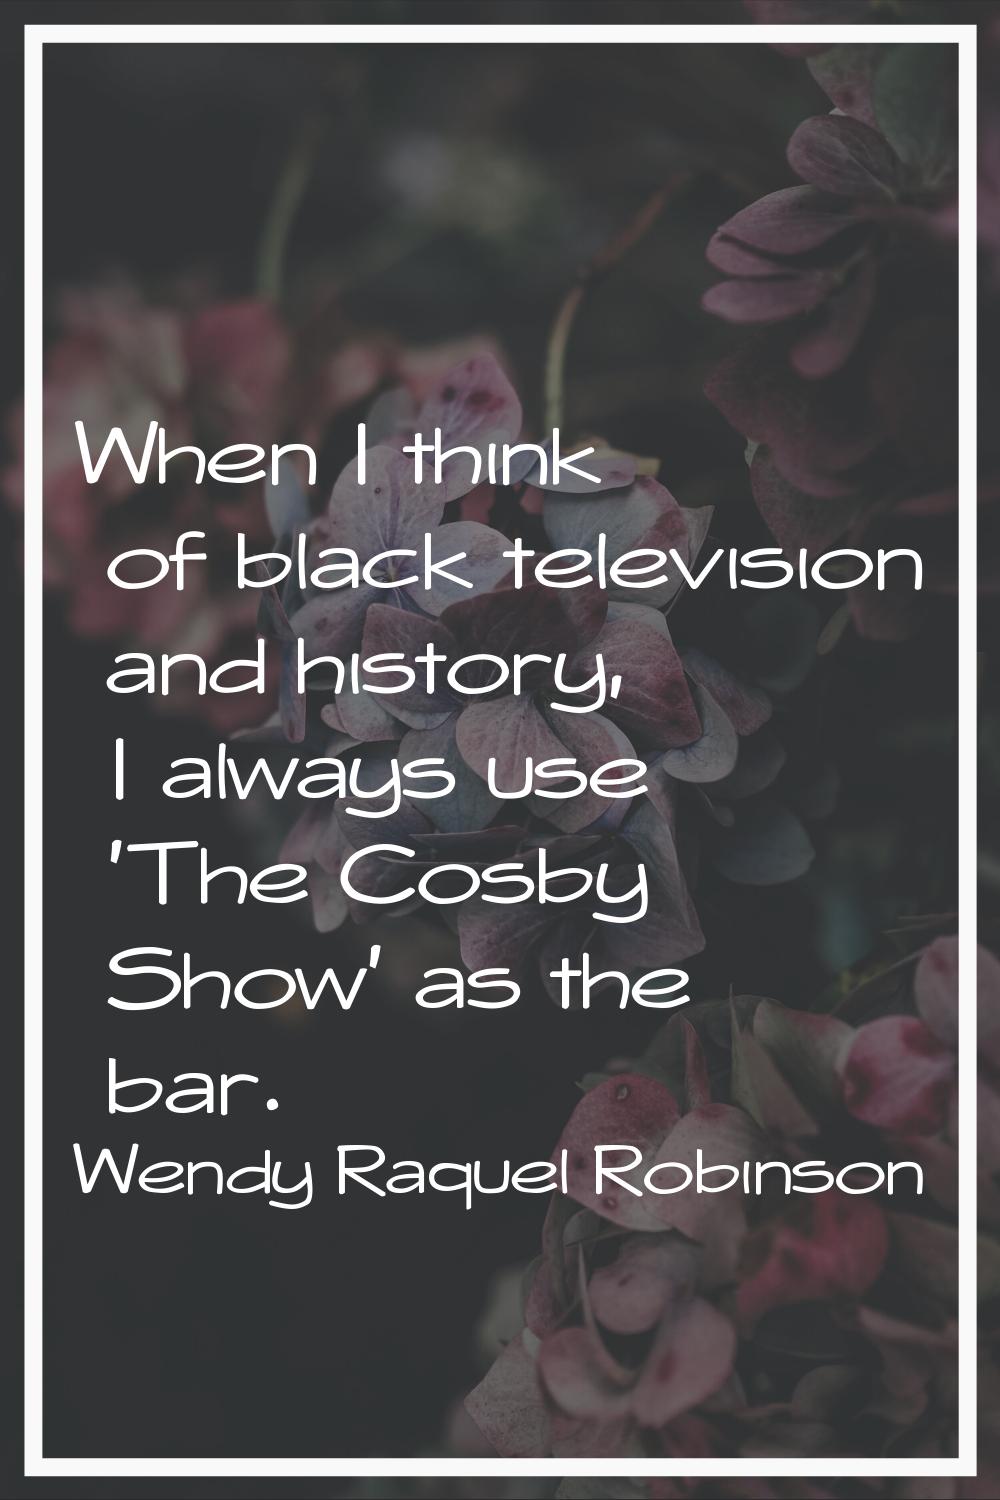 When I think of black television and history, I always use 'The Cosby Show' as the bar.